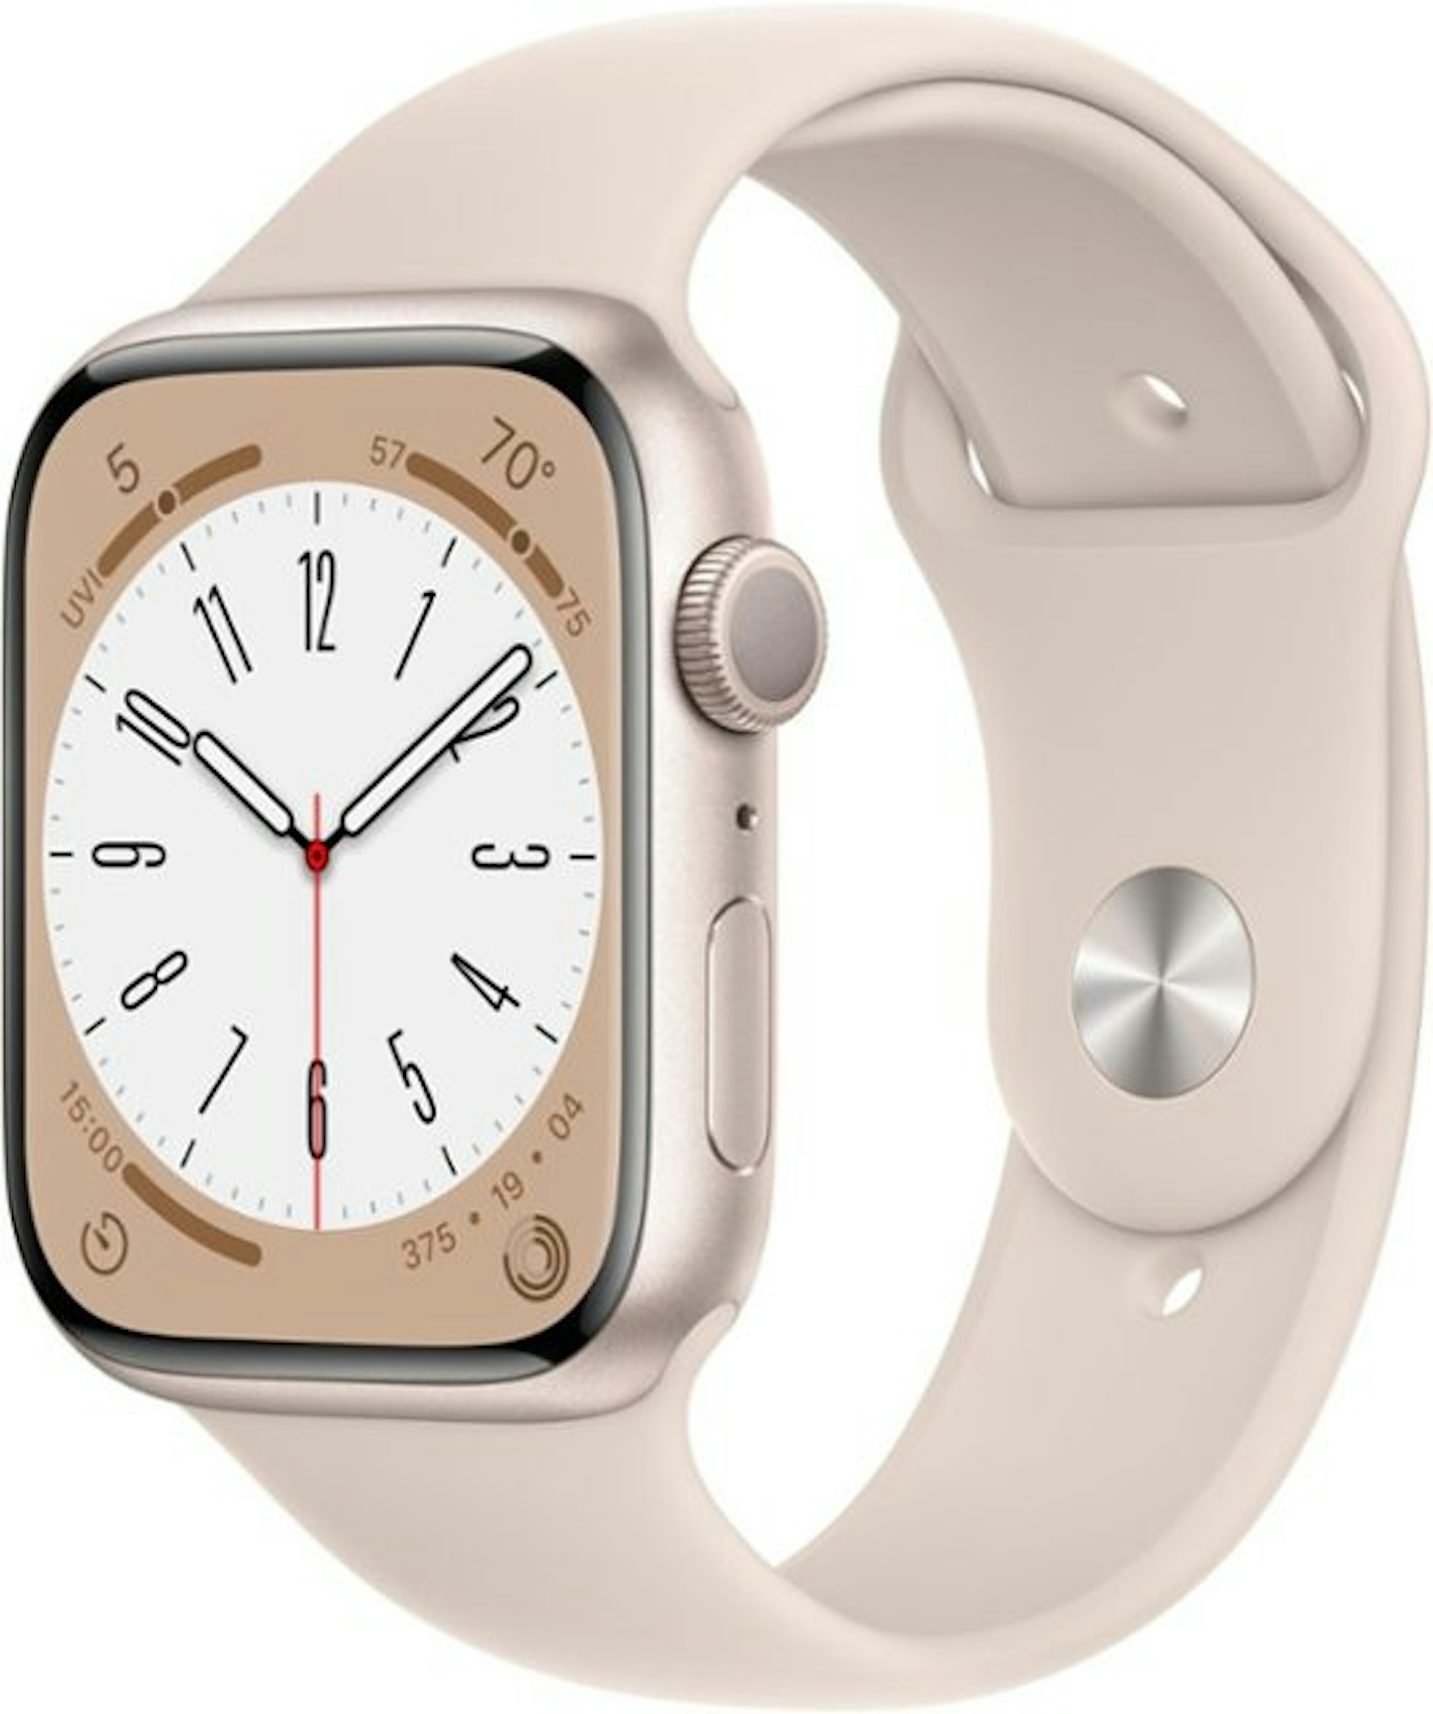 https://images.stockx.com/images/Apple-Watch-Series-8-GPS-41mm-Starlight-Aluminum-with-Starlight-Sport-Band-A2770.jpg?fit=fill&bg=FFFFFF&w=1200&h=857&fm=jpg&auto=compress&dpr=2&trim=color&updated_at=1663781097&q=60